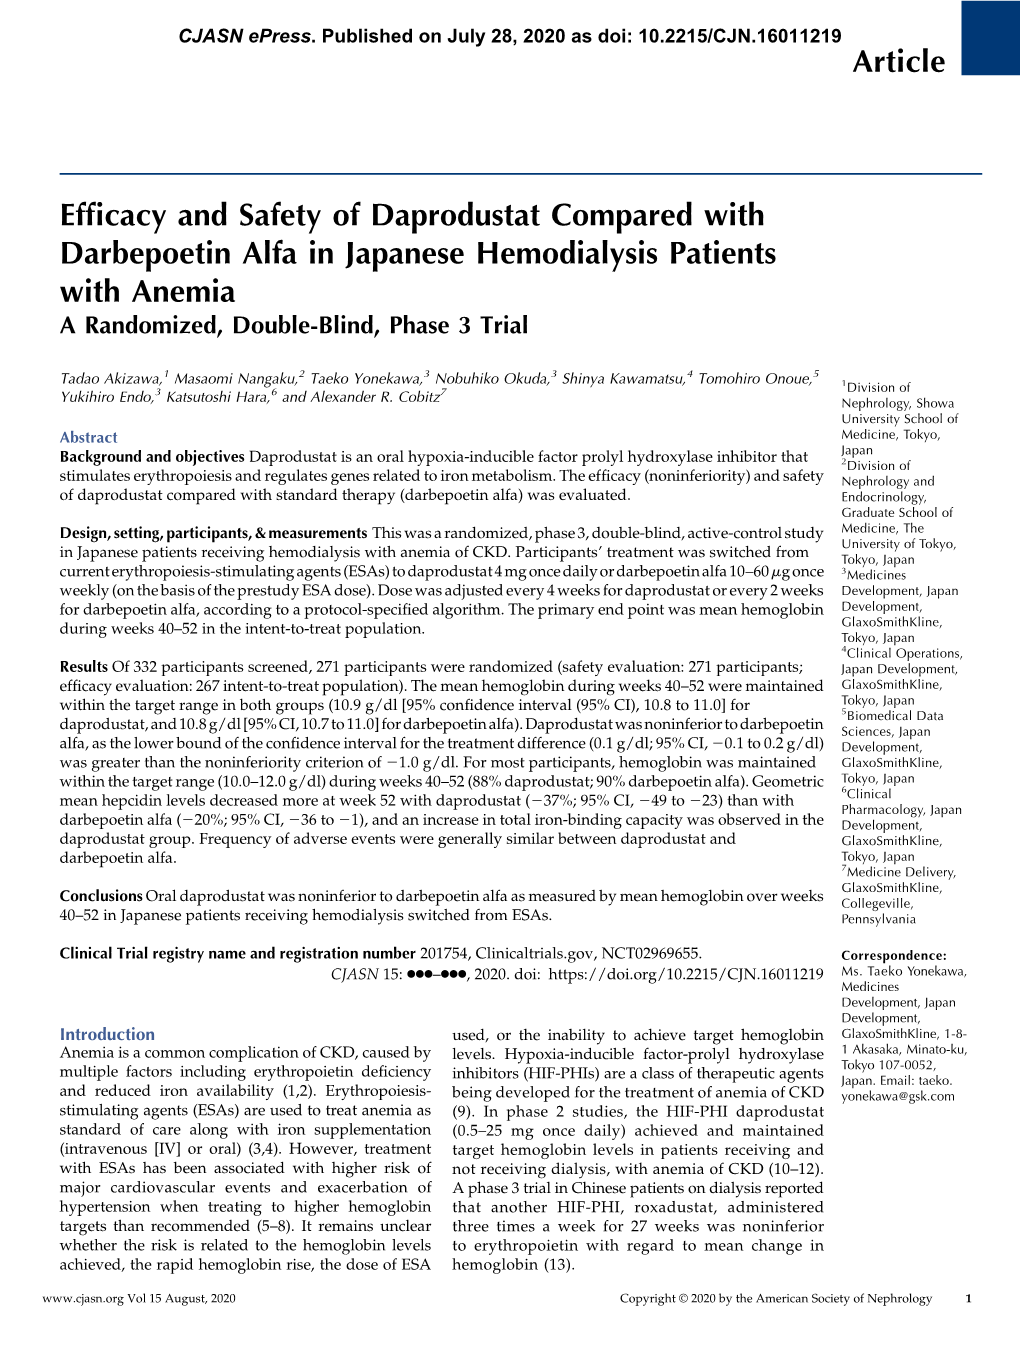 Article Efficacy and Safety of Daprodustat Compared